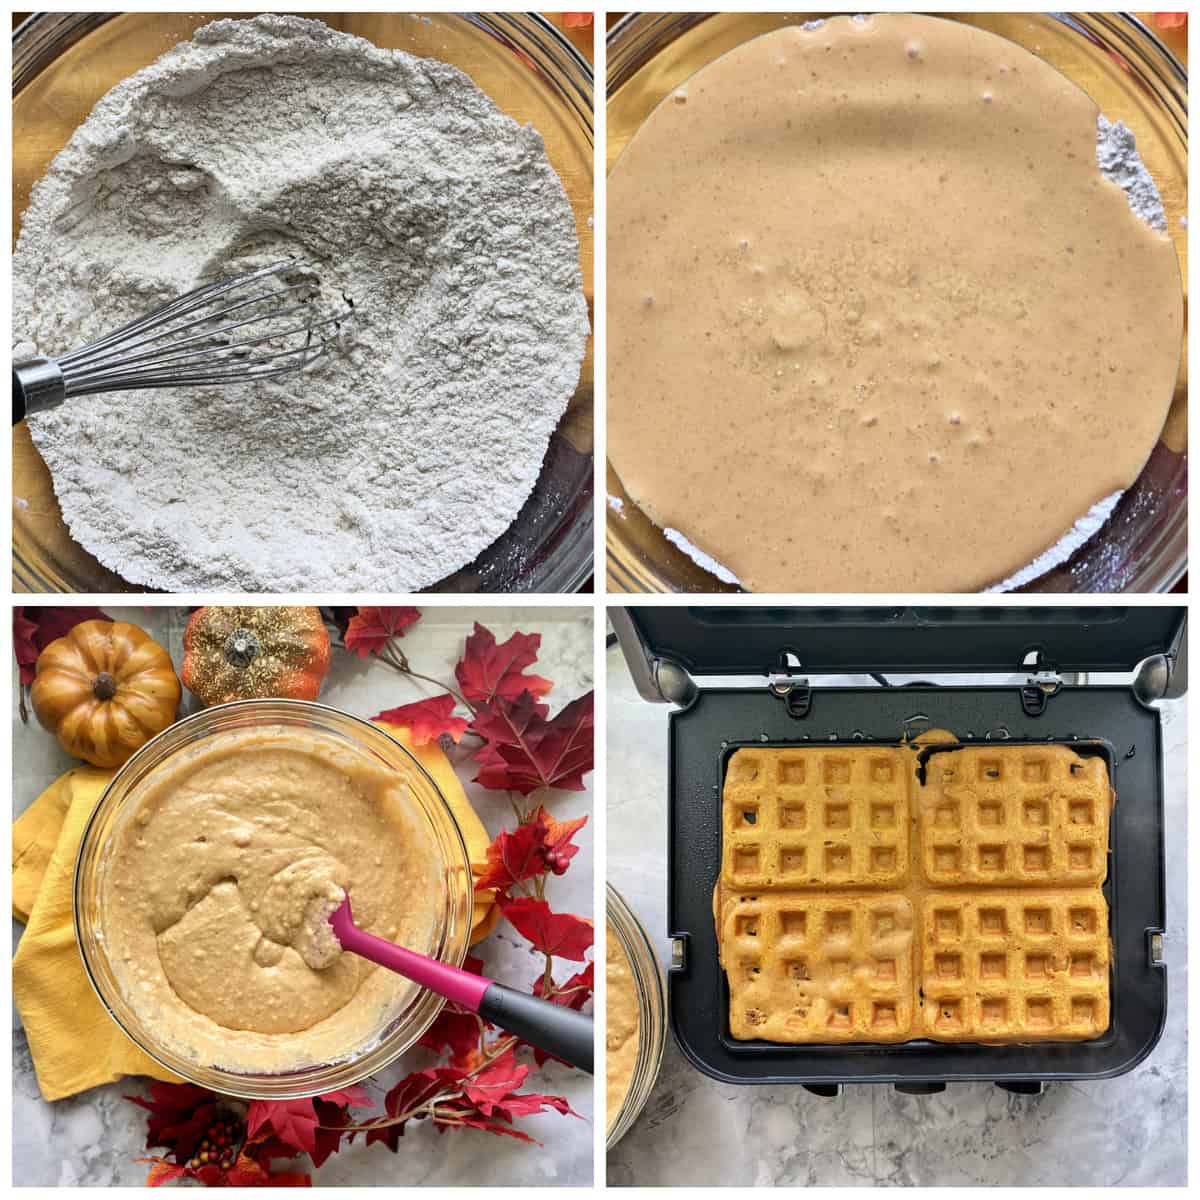 Four process shot photos: flour whisking, liquid in bowl, mixed batter, and waffles on waffle iron.